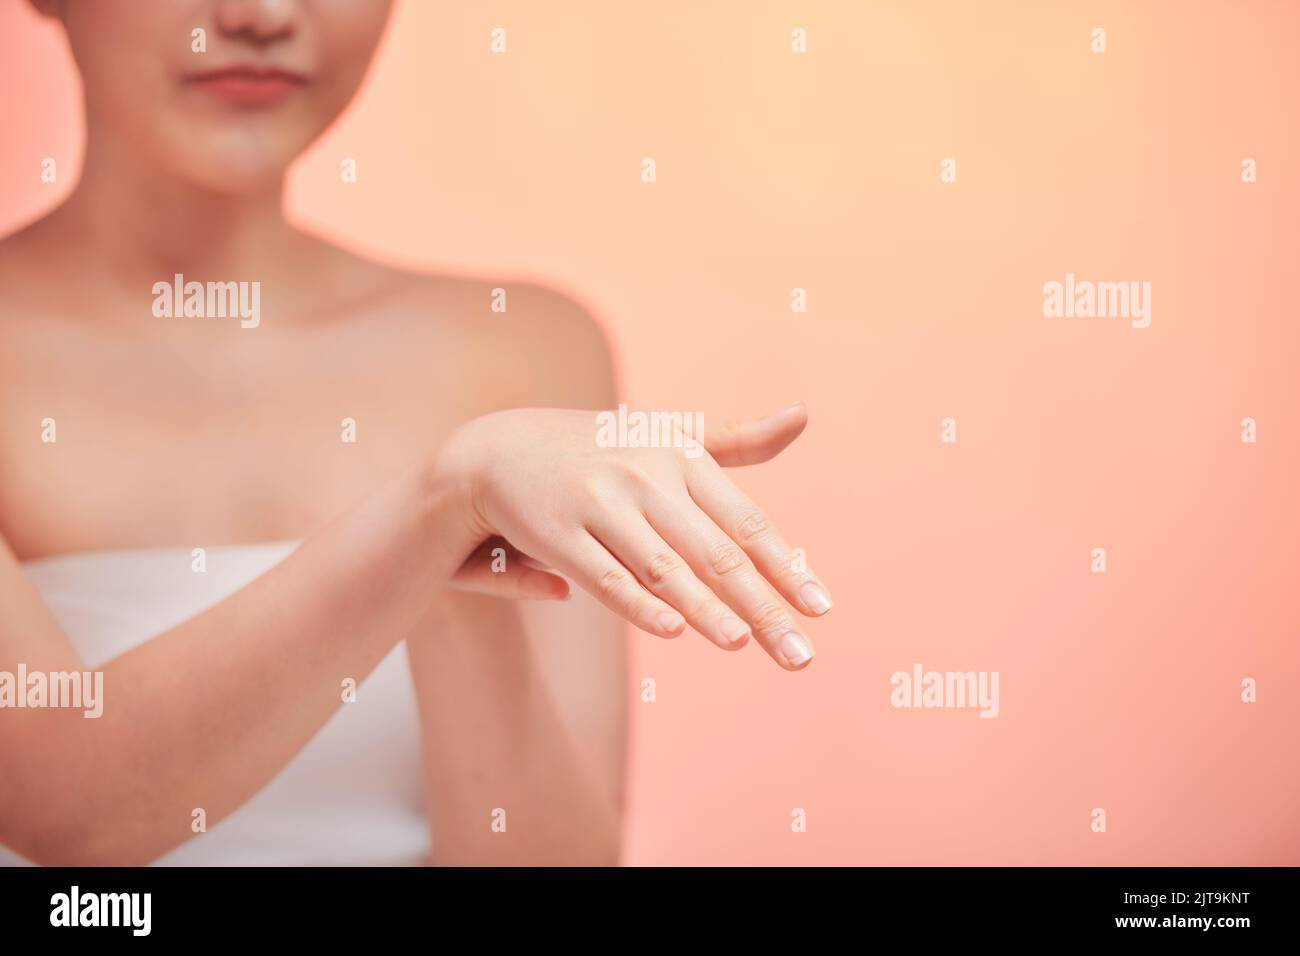 Beautiful young woman applying cosmetic moisturizer on hands Stock Photo